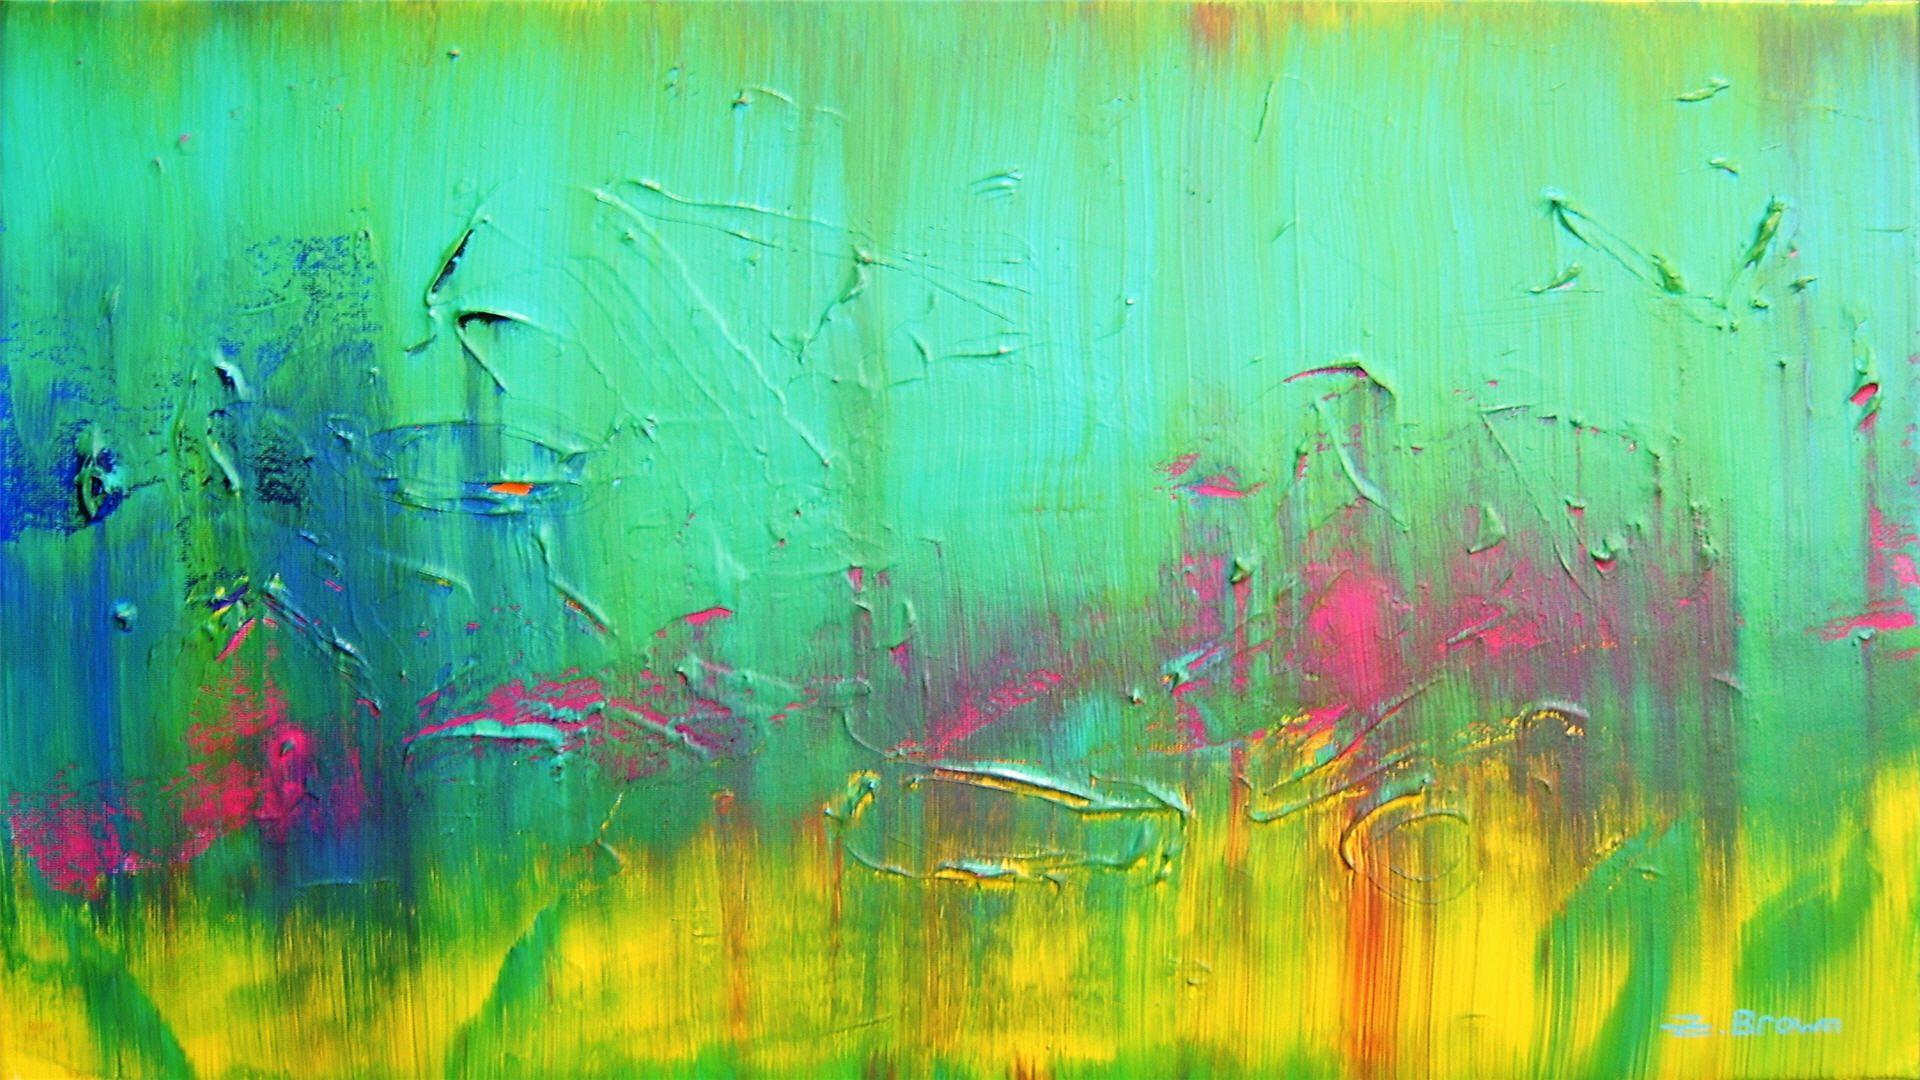 Wallpaper.wiki Abstract Painting Wallpaper 1080p For Computer PIC